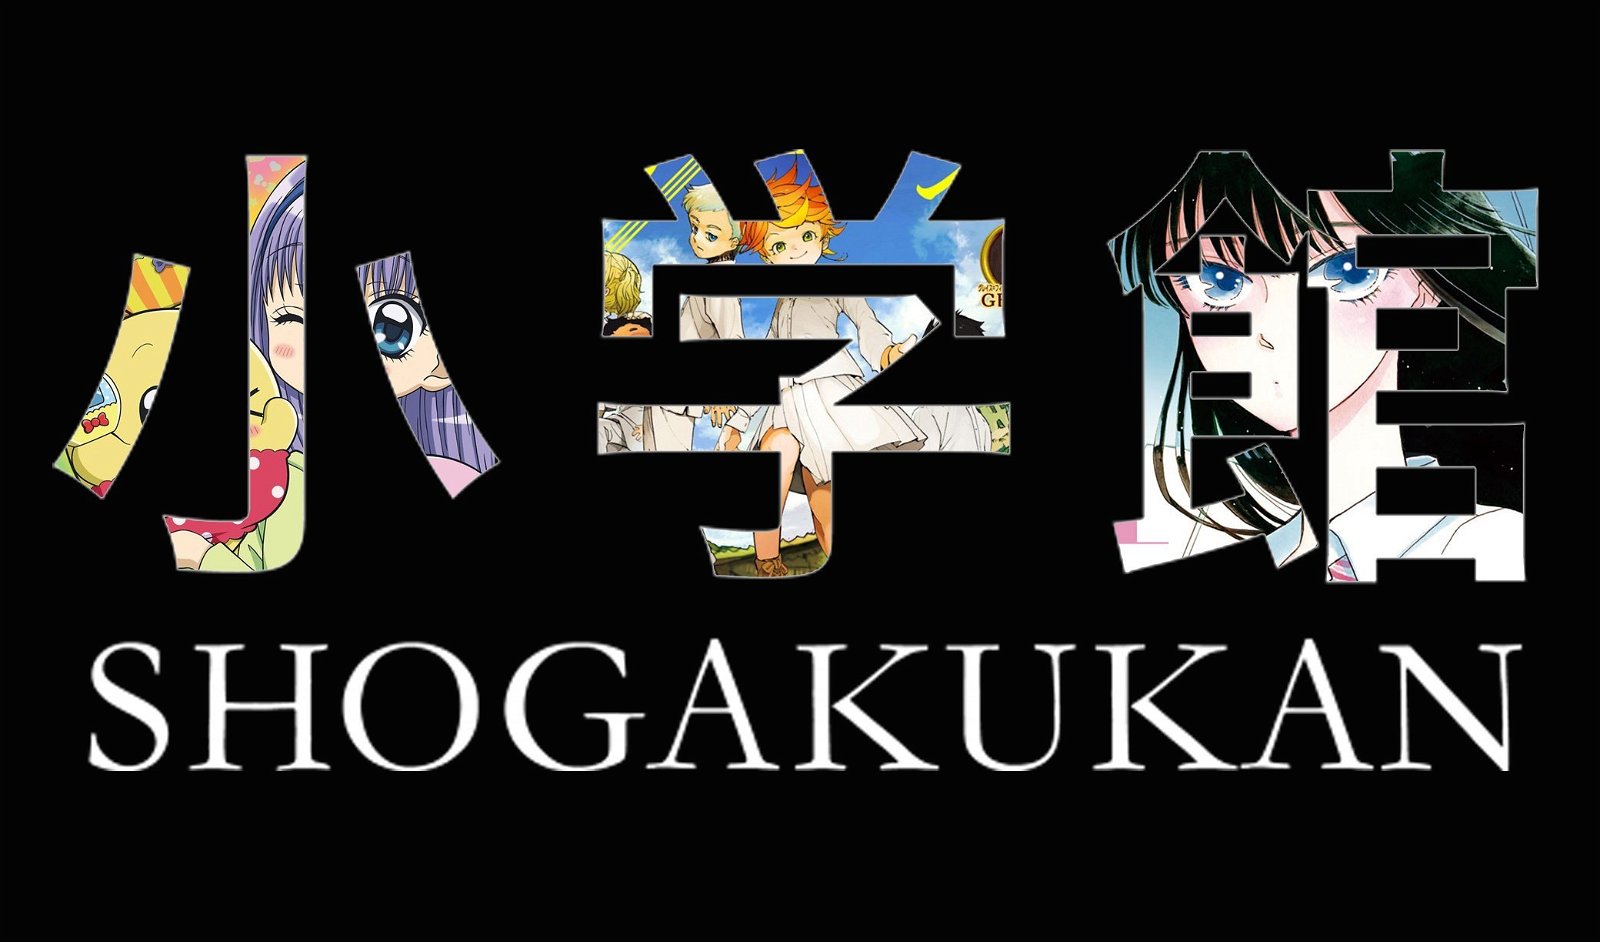 Shogakukan and Other Companies Look to Invest in AI Manga Translations